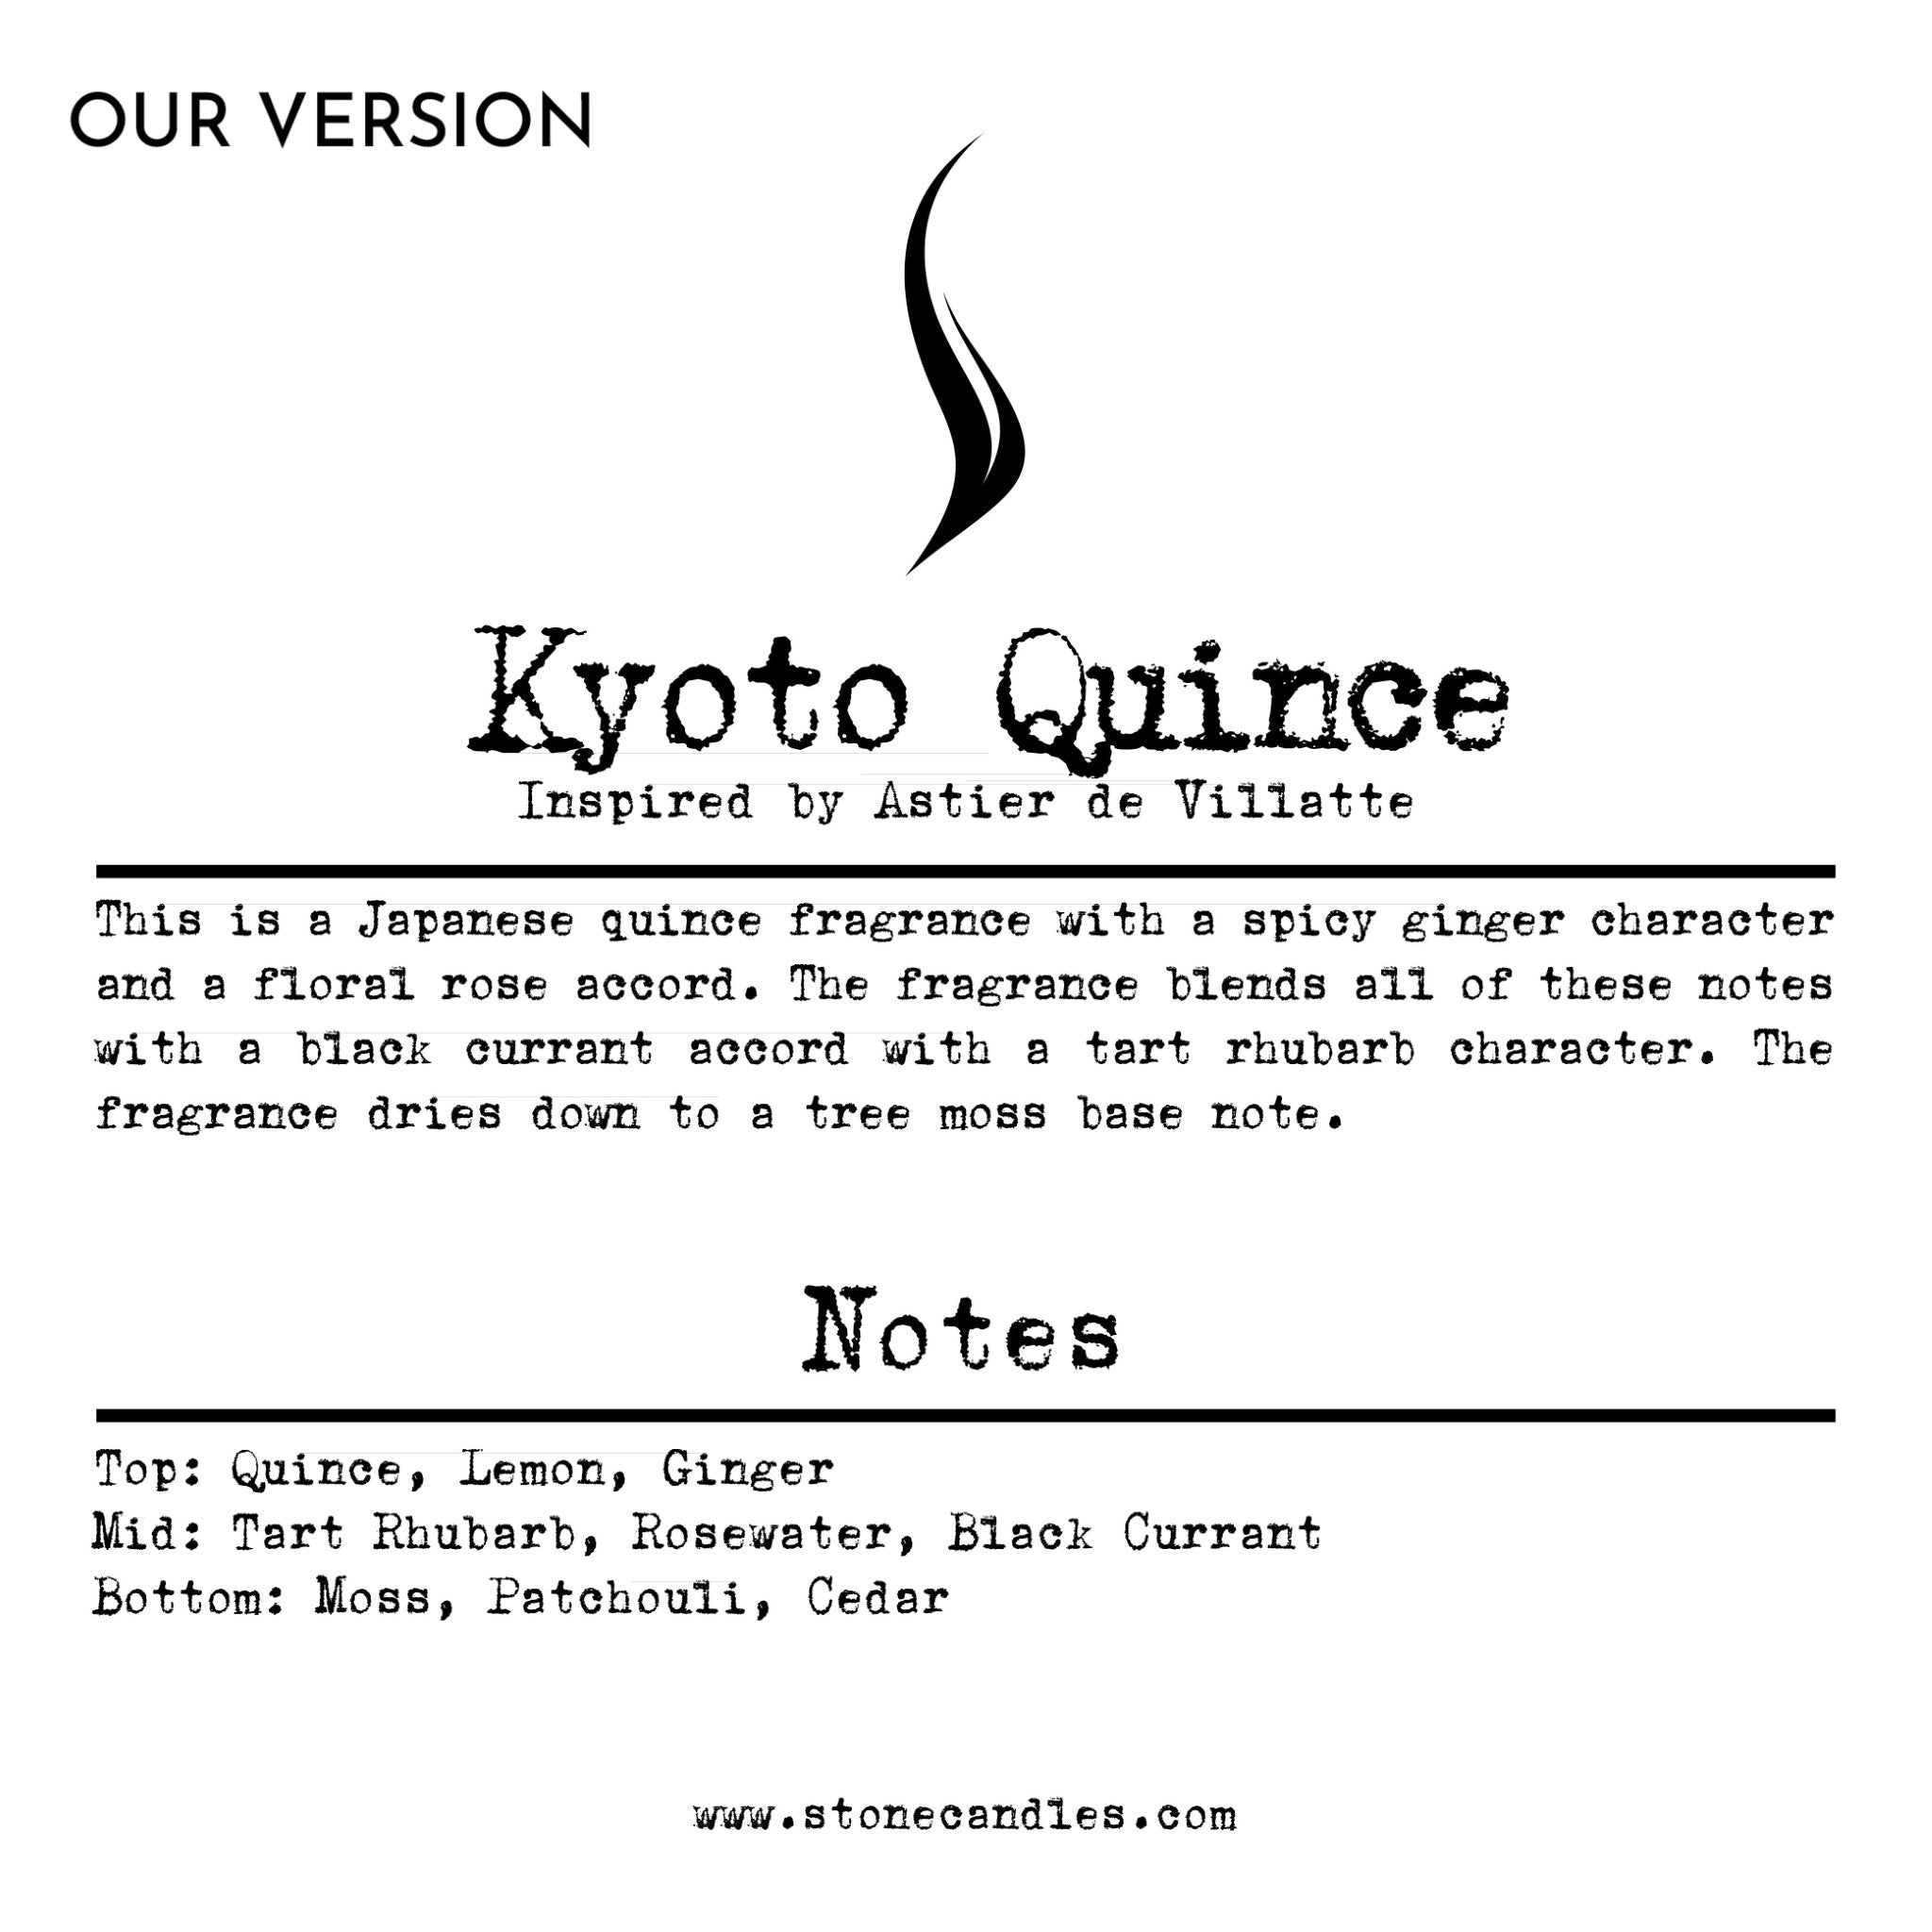 Kyoto Quince (our version) Sample Scent Strip